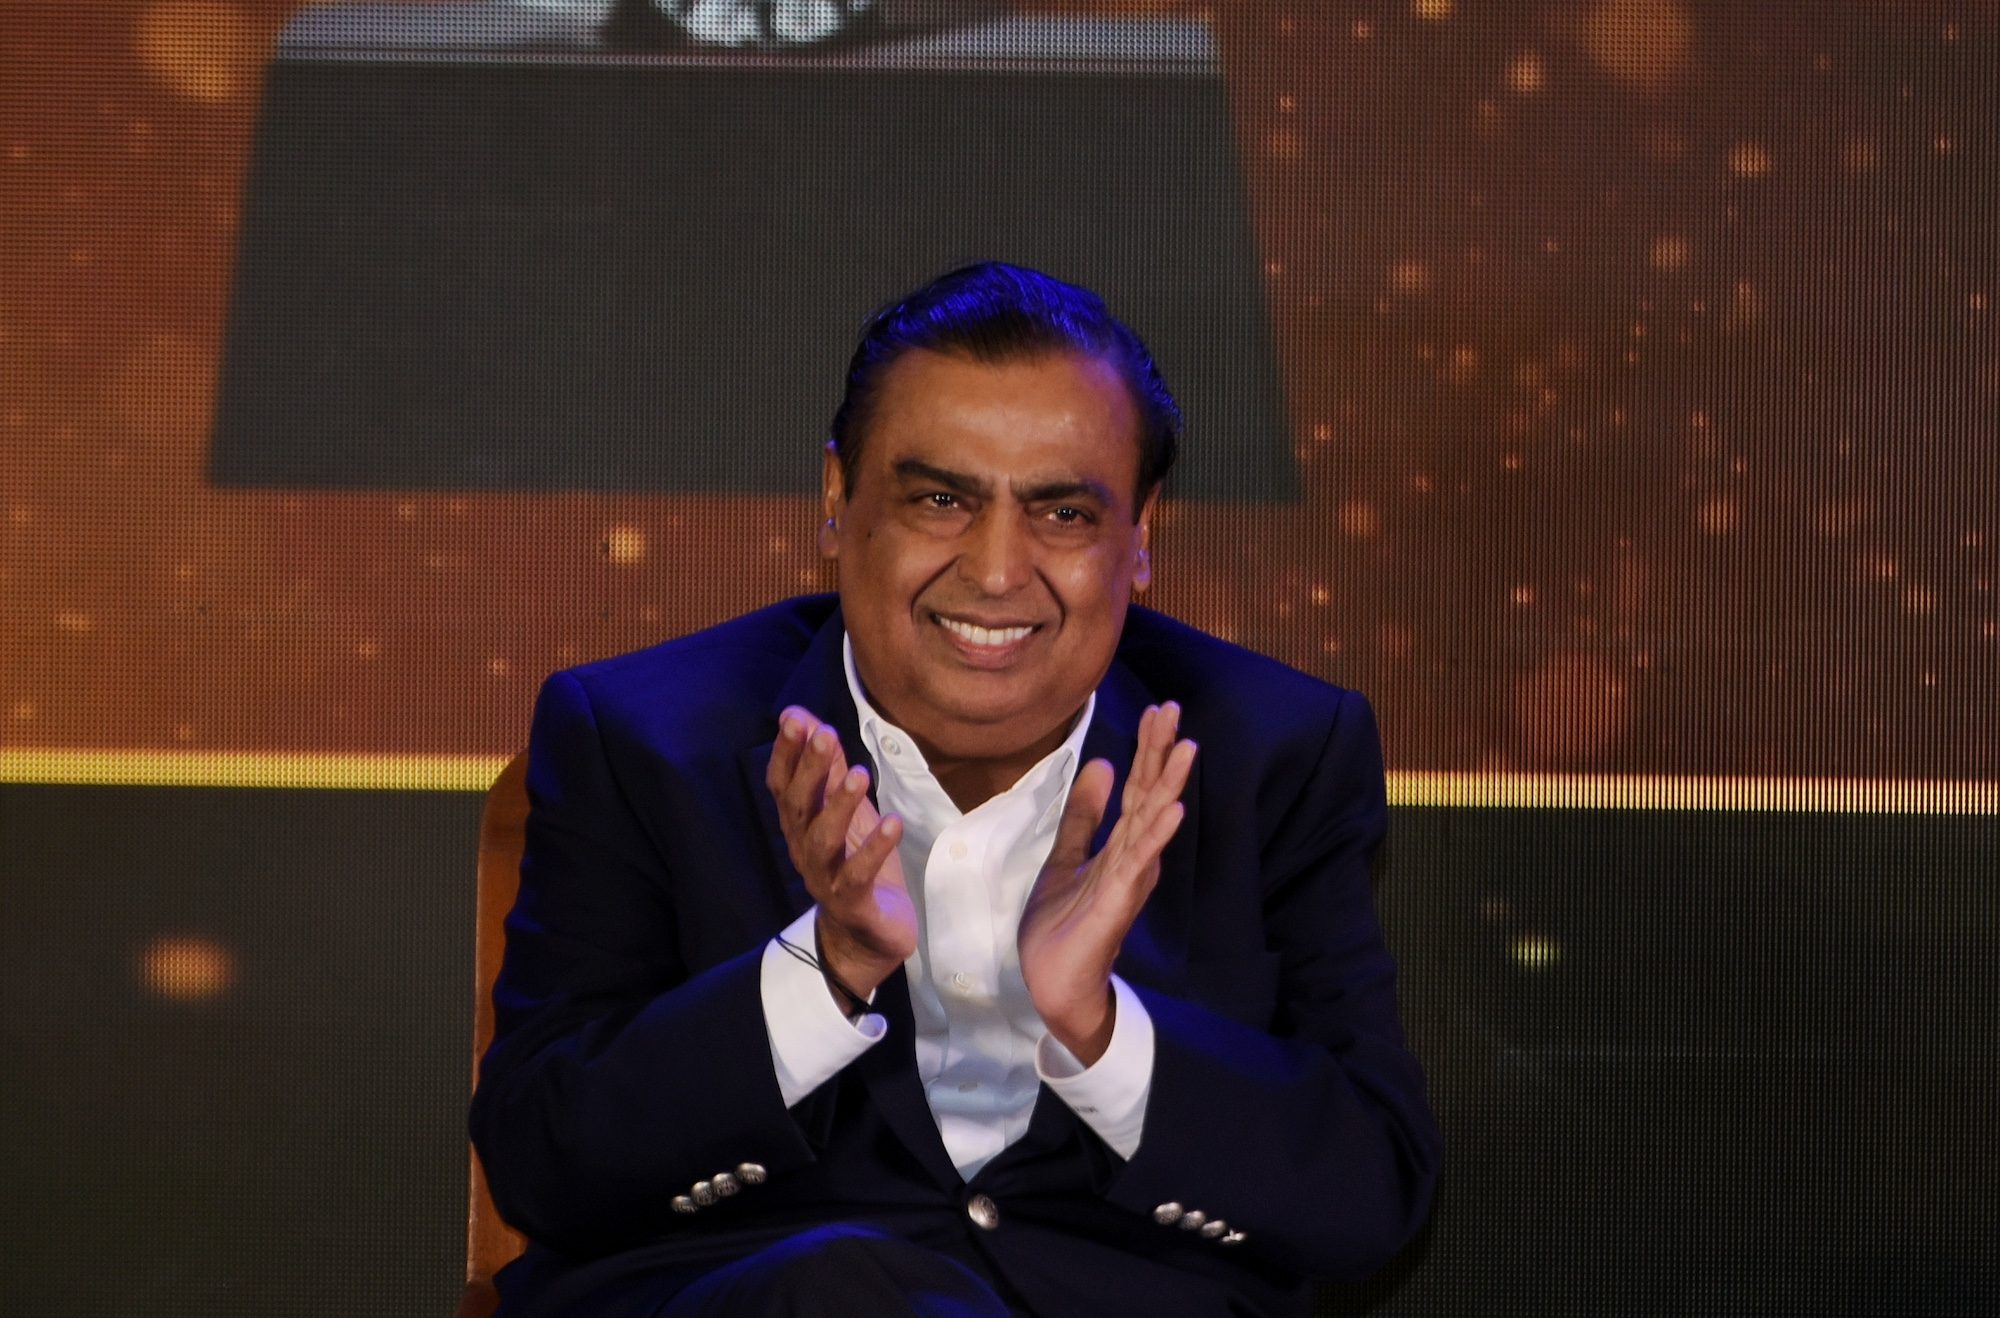 Mukesh Ambani, chairman and managing director of Reliance Industries which will receive the investment from AIDA and US-based KKR